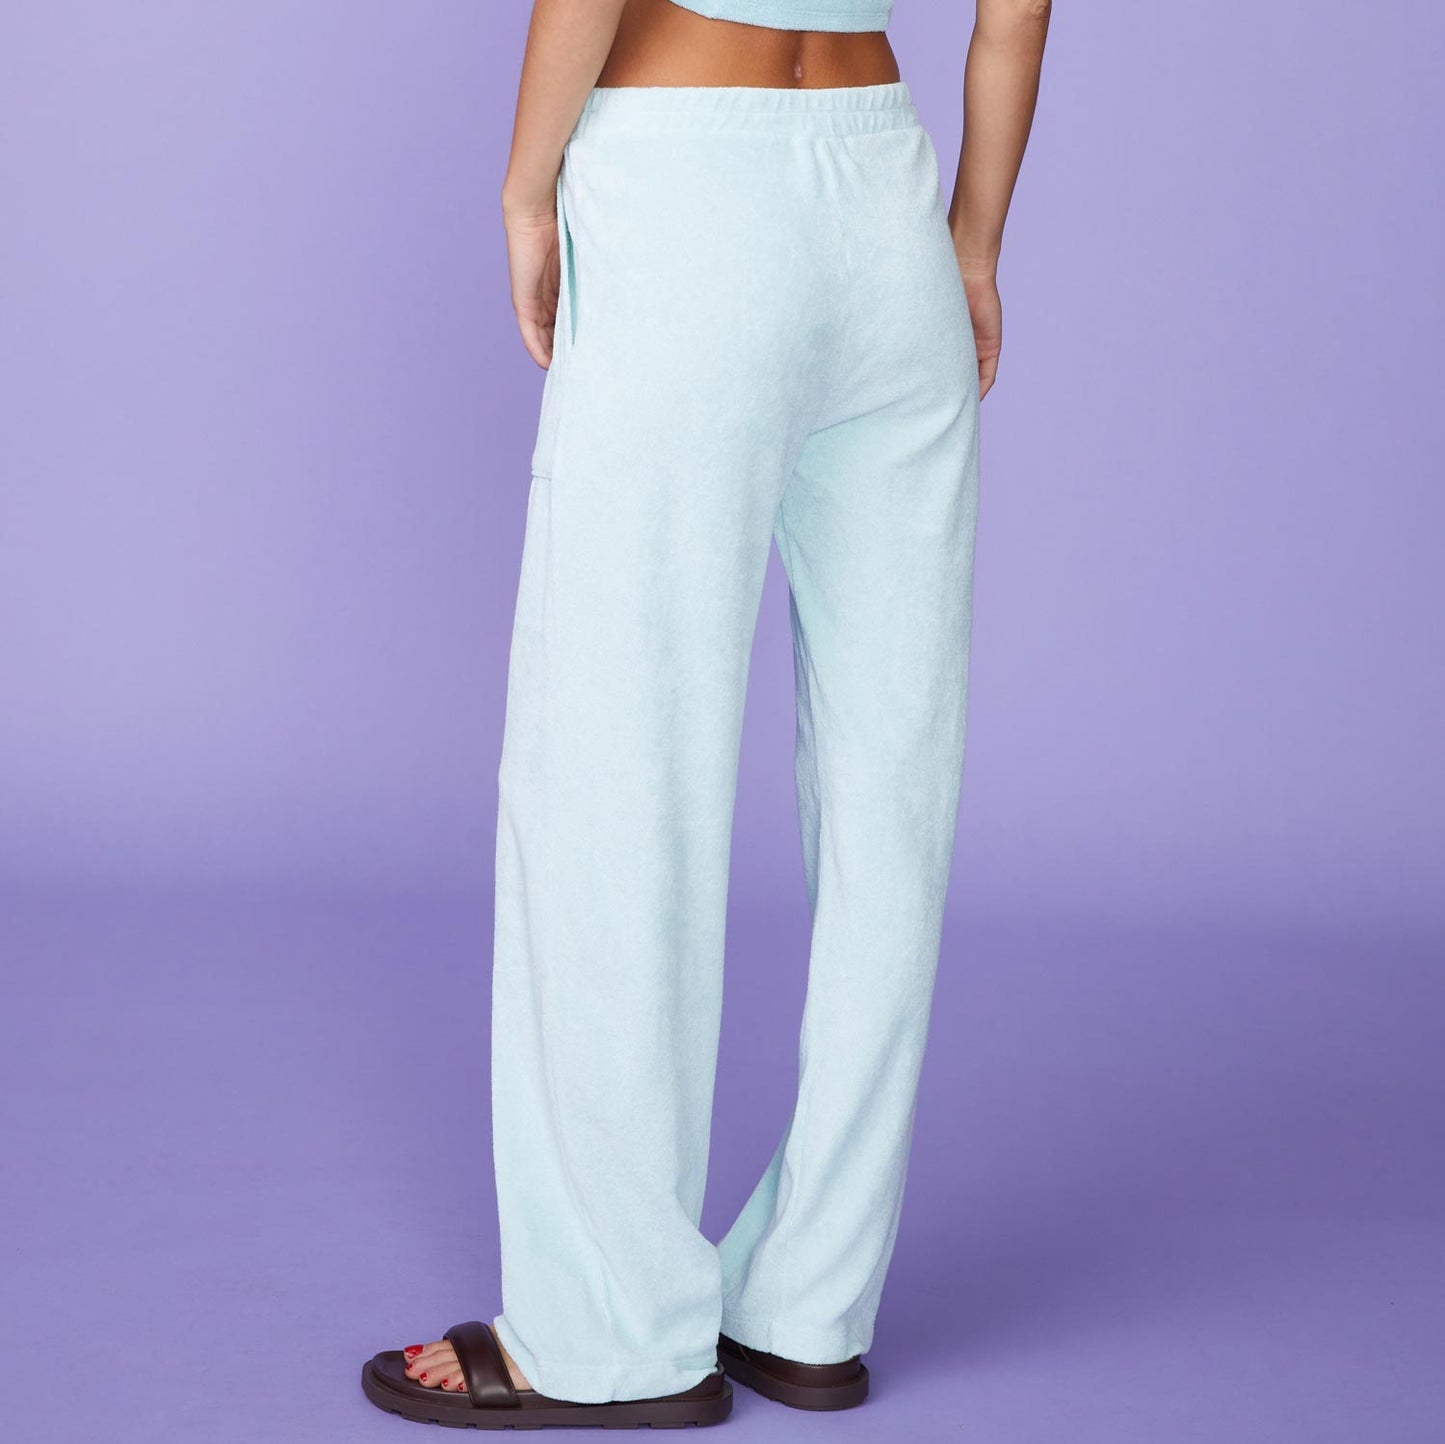 Side View of model wearing the Terry Cloth Patch Pocket Pant in Sea Foam.